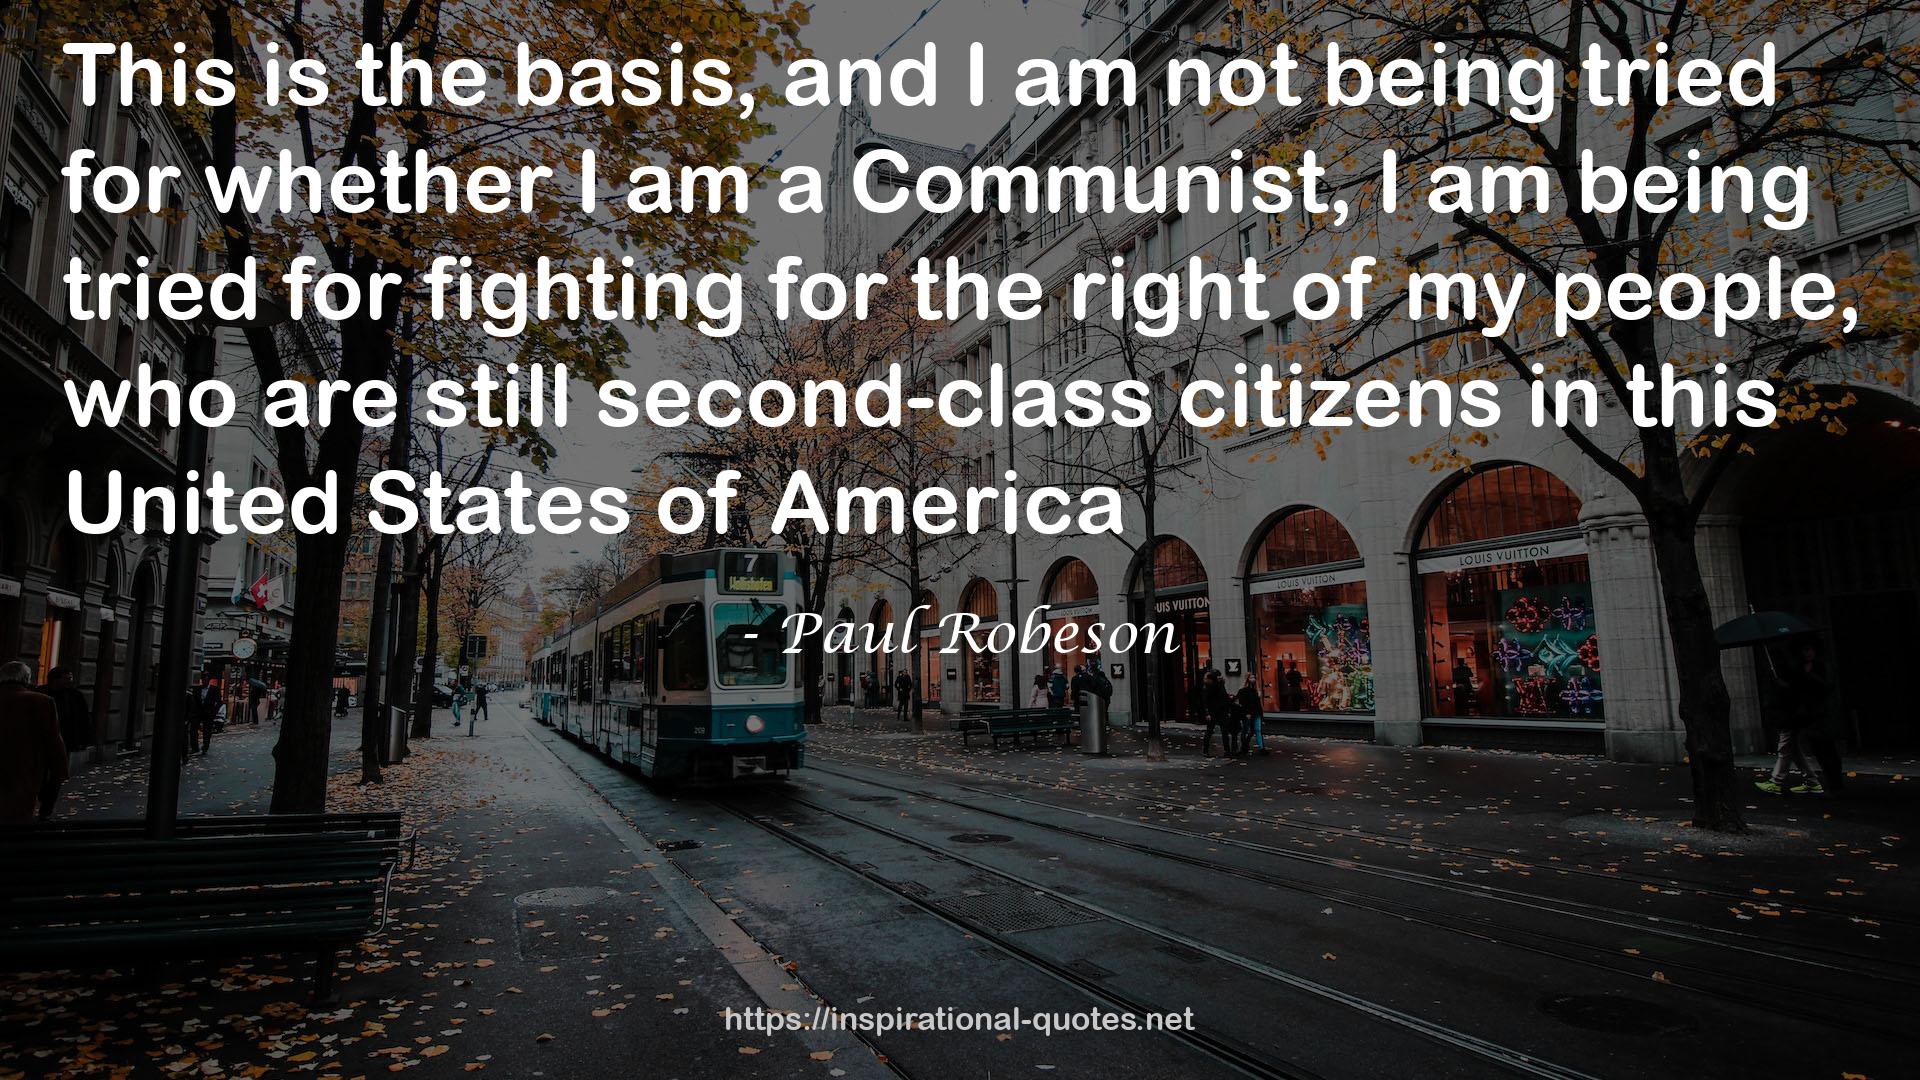 Paul Robeson QUOTES